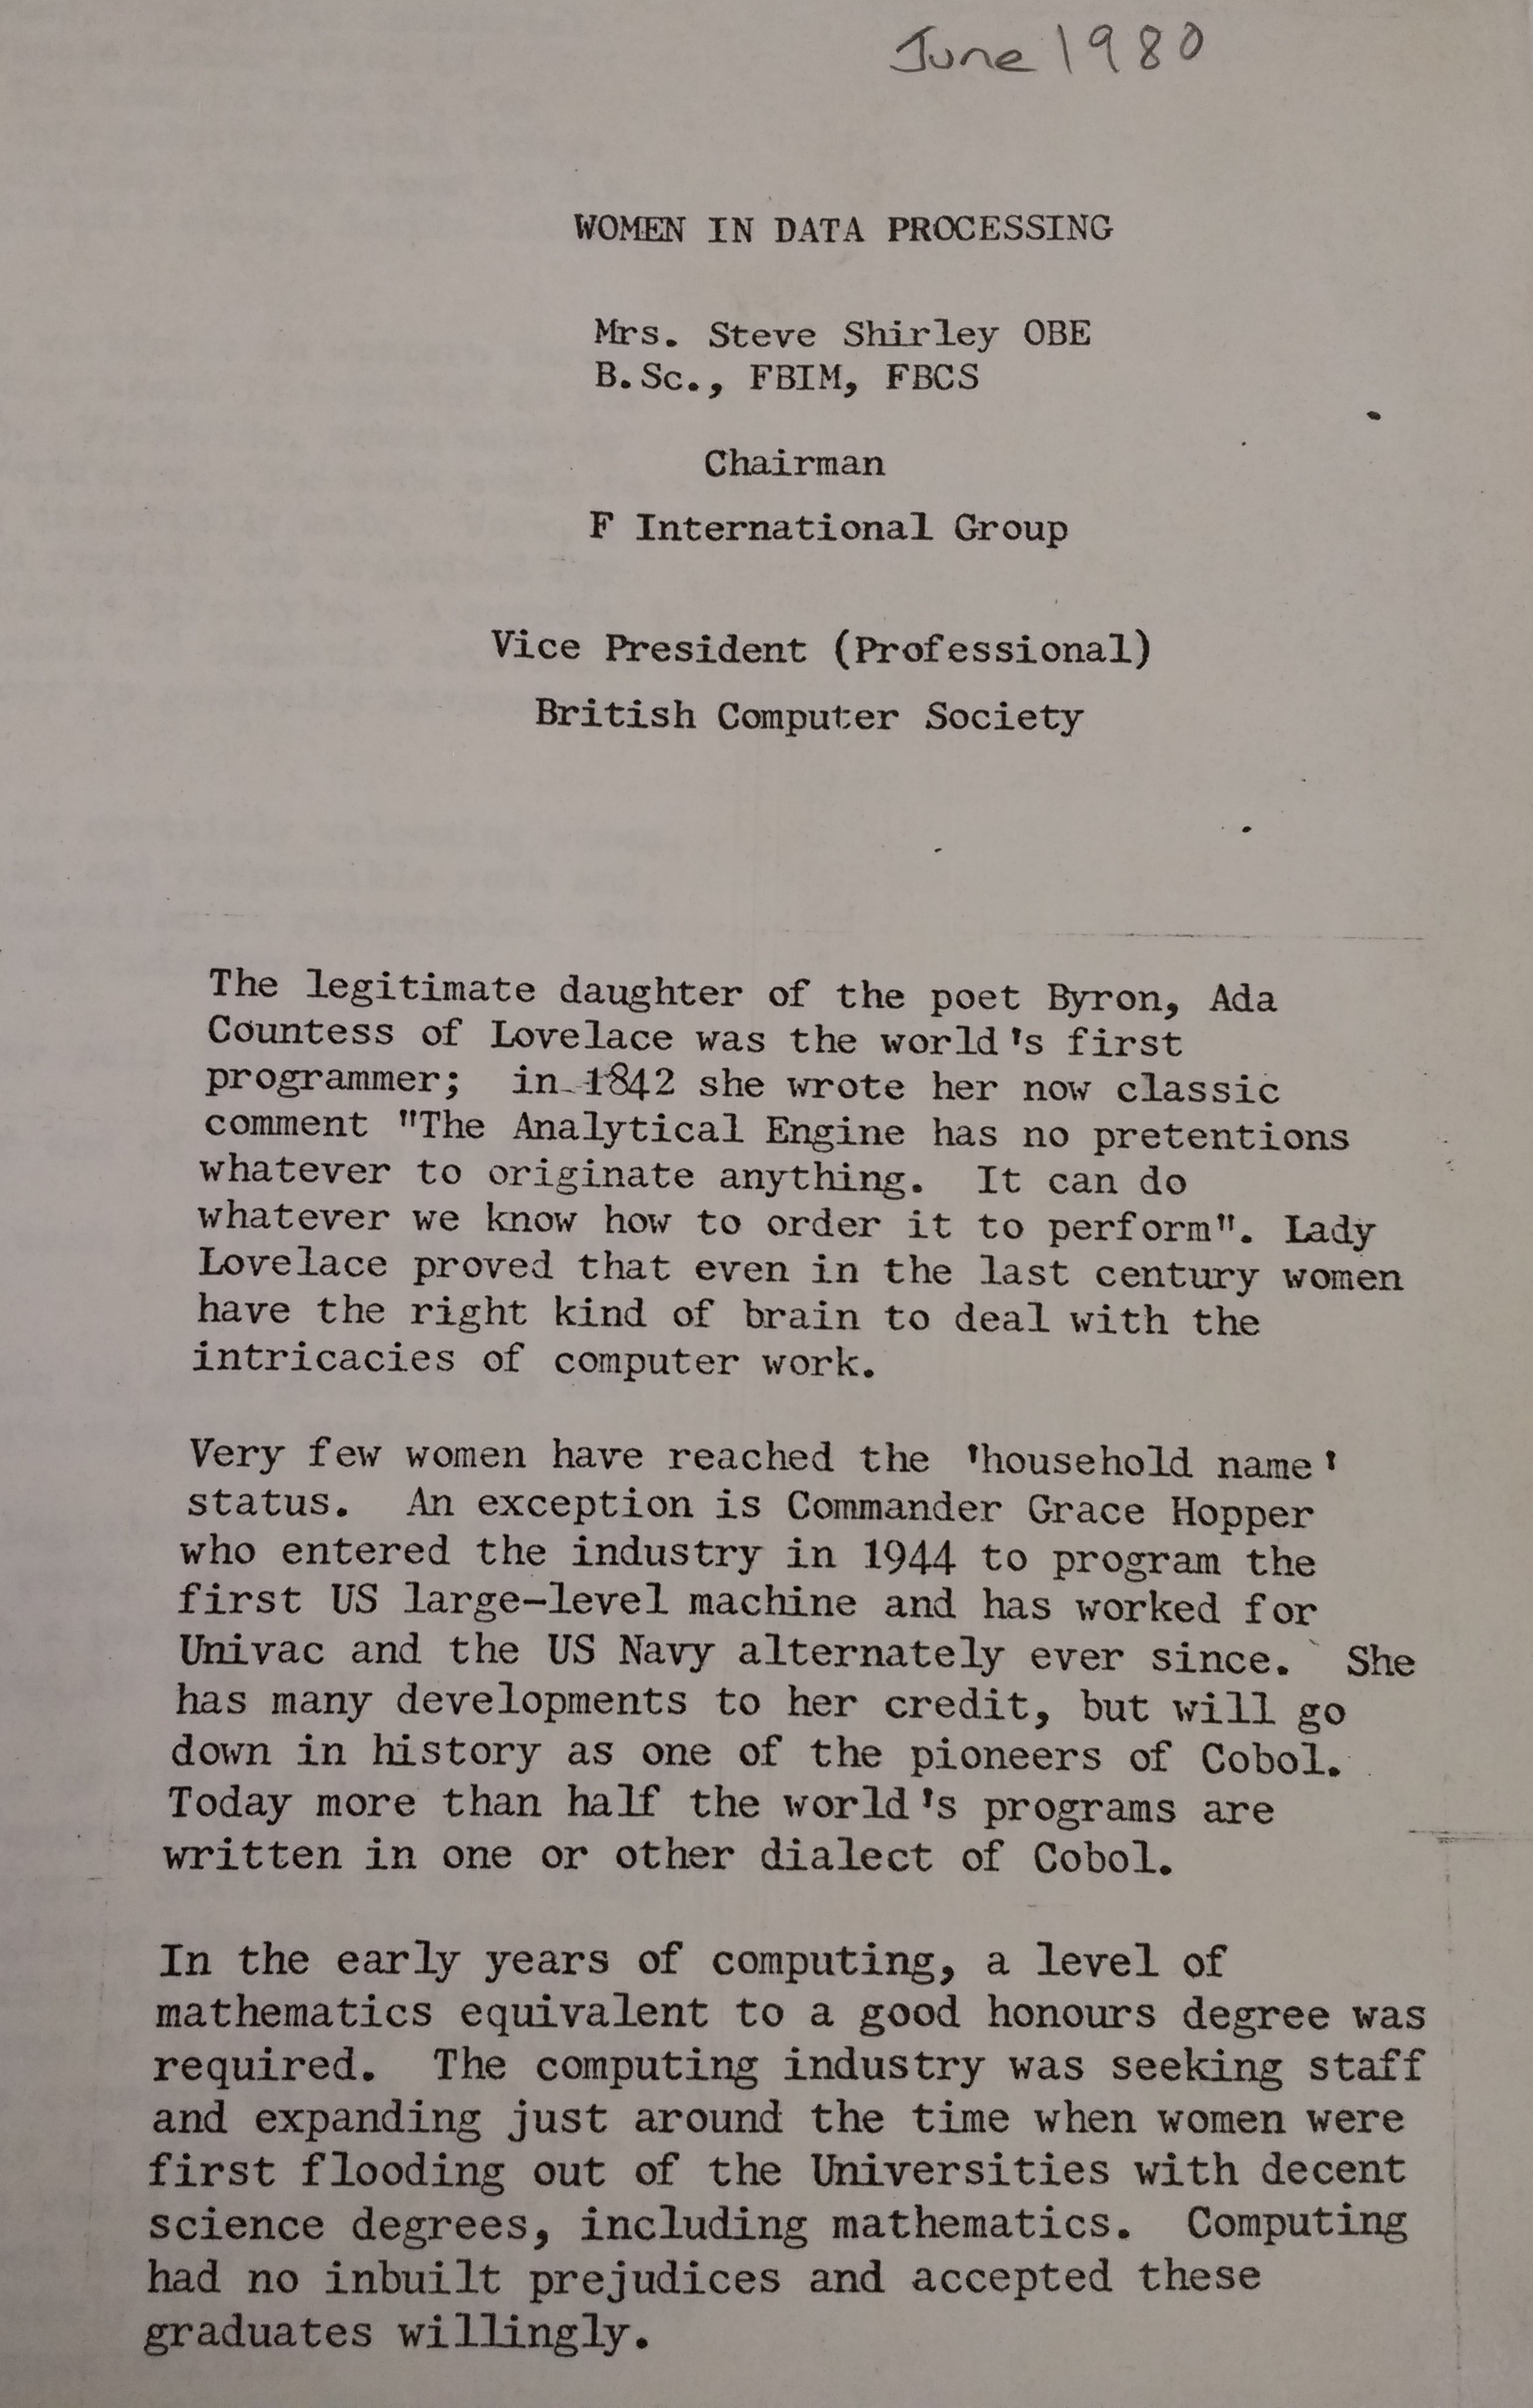 Text page of a speech on Women in Data Processing June 1980